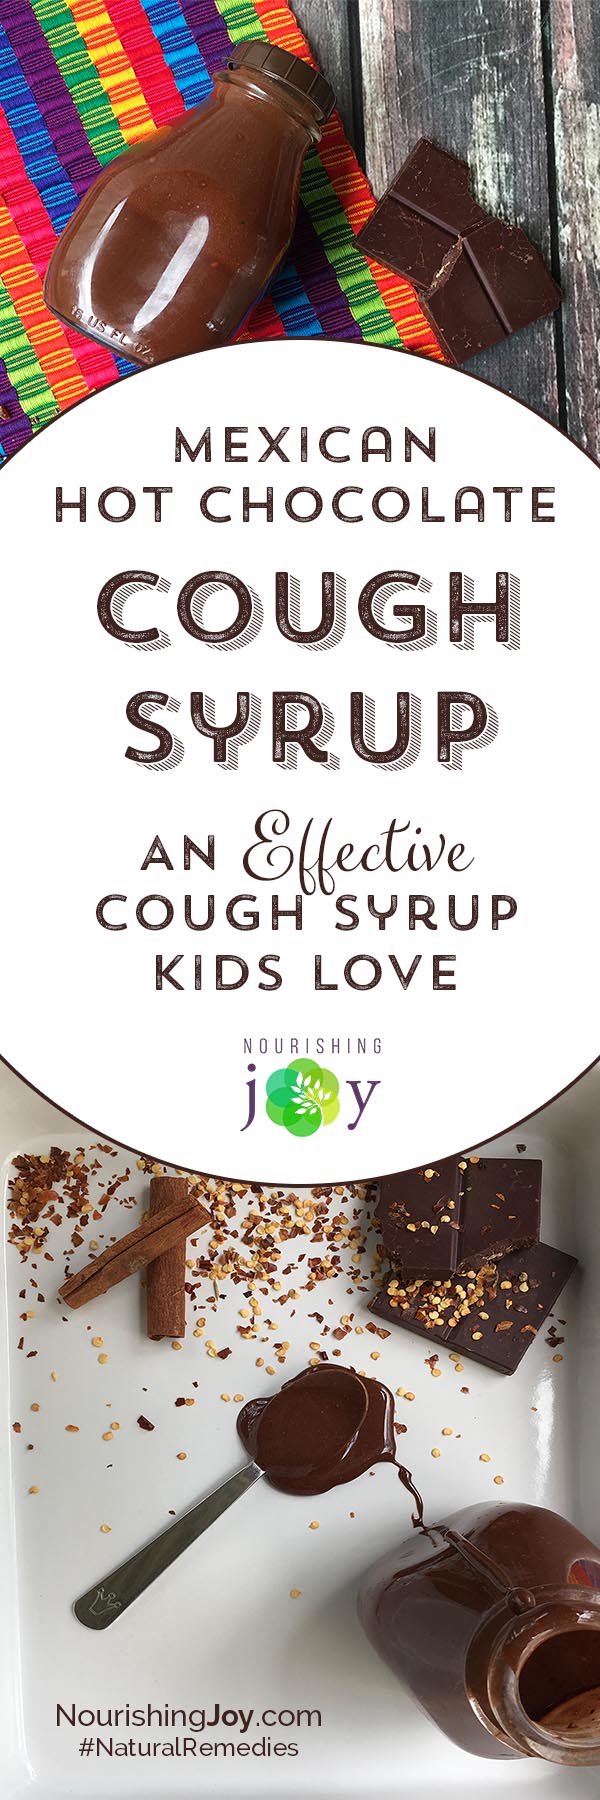 Did you know that recent studies have shown that theobromine, the main chemical constituent in chocolate, has been proven to be more effective for cough relief than codeine? And not only that, but this cough syrup is SERIOUSLY TASTY - kids and adults alike will absolutely love the flavor AND find relief.